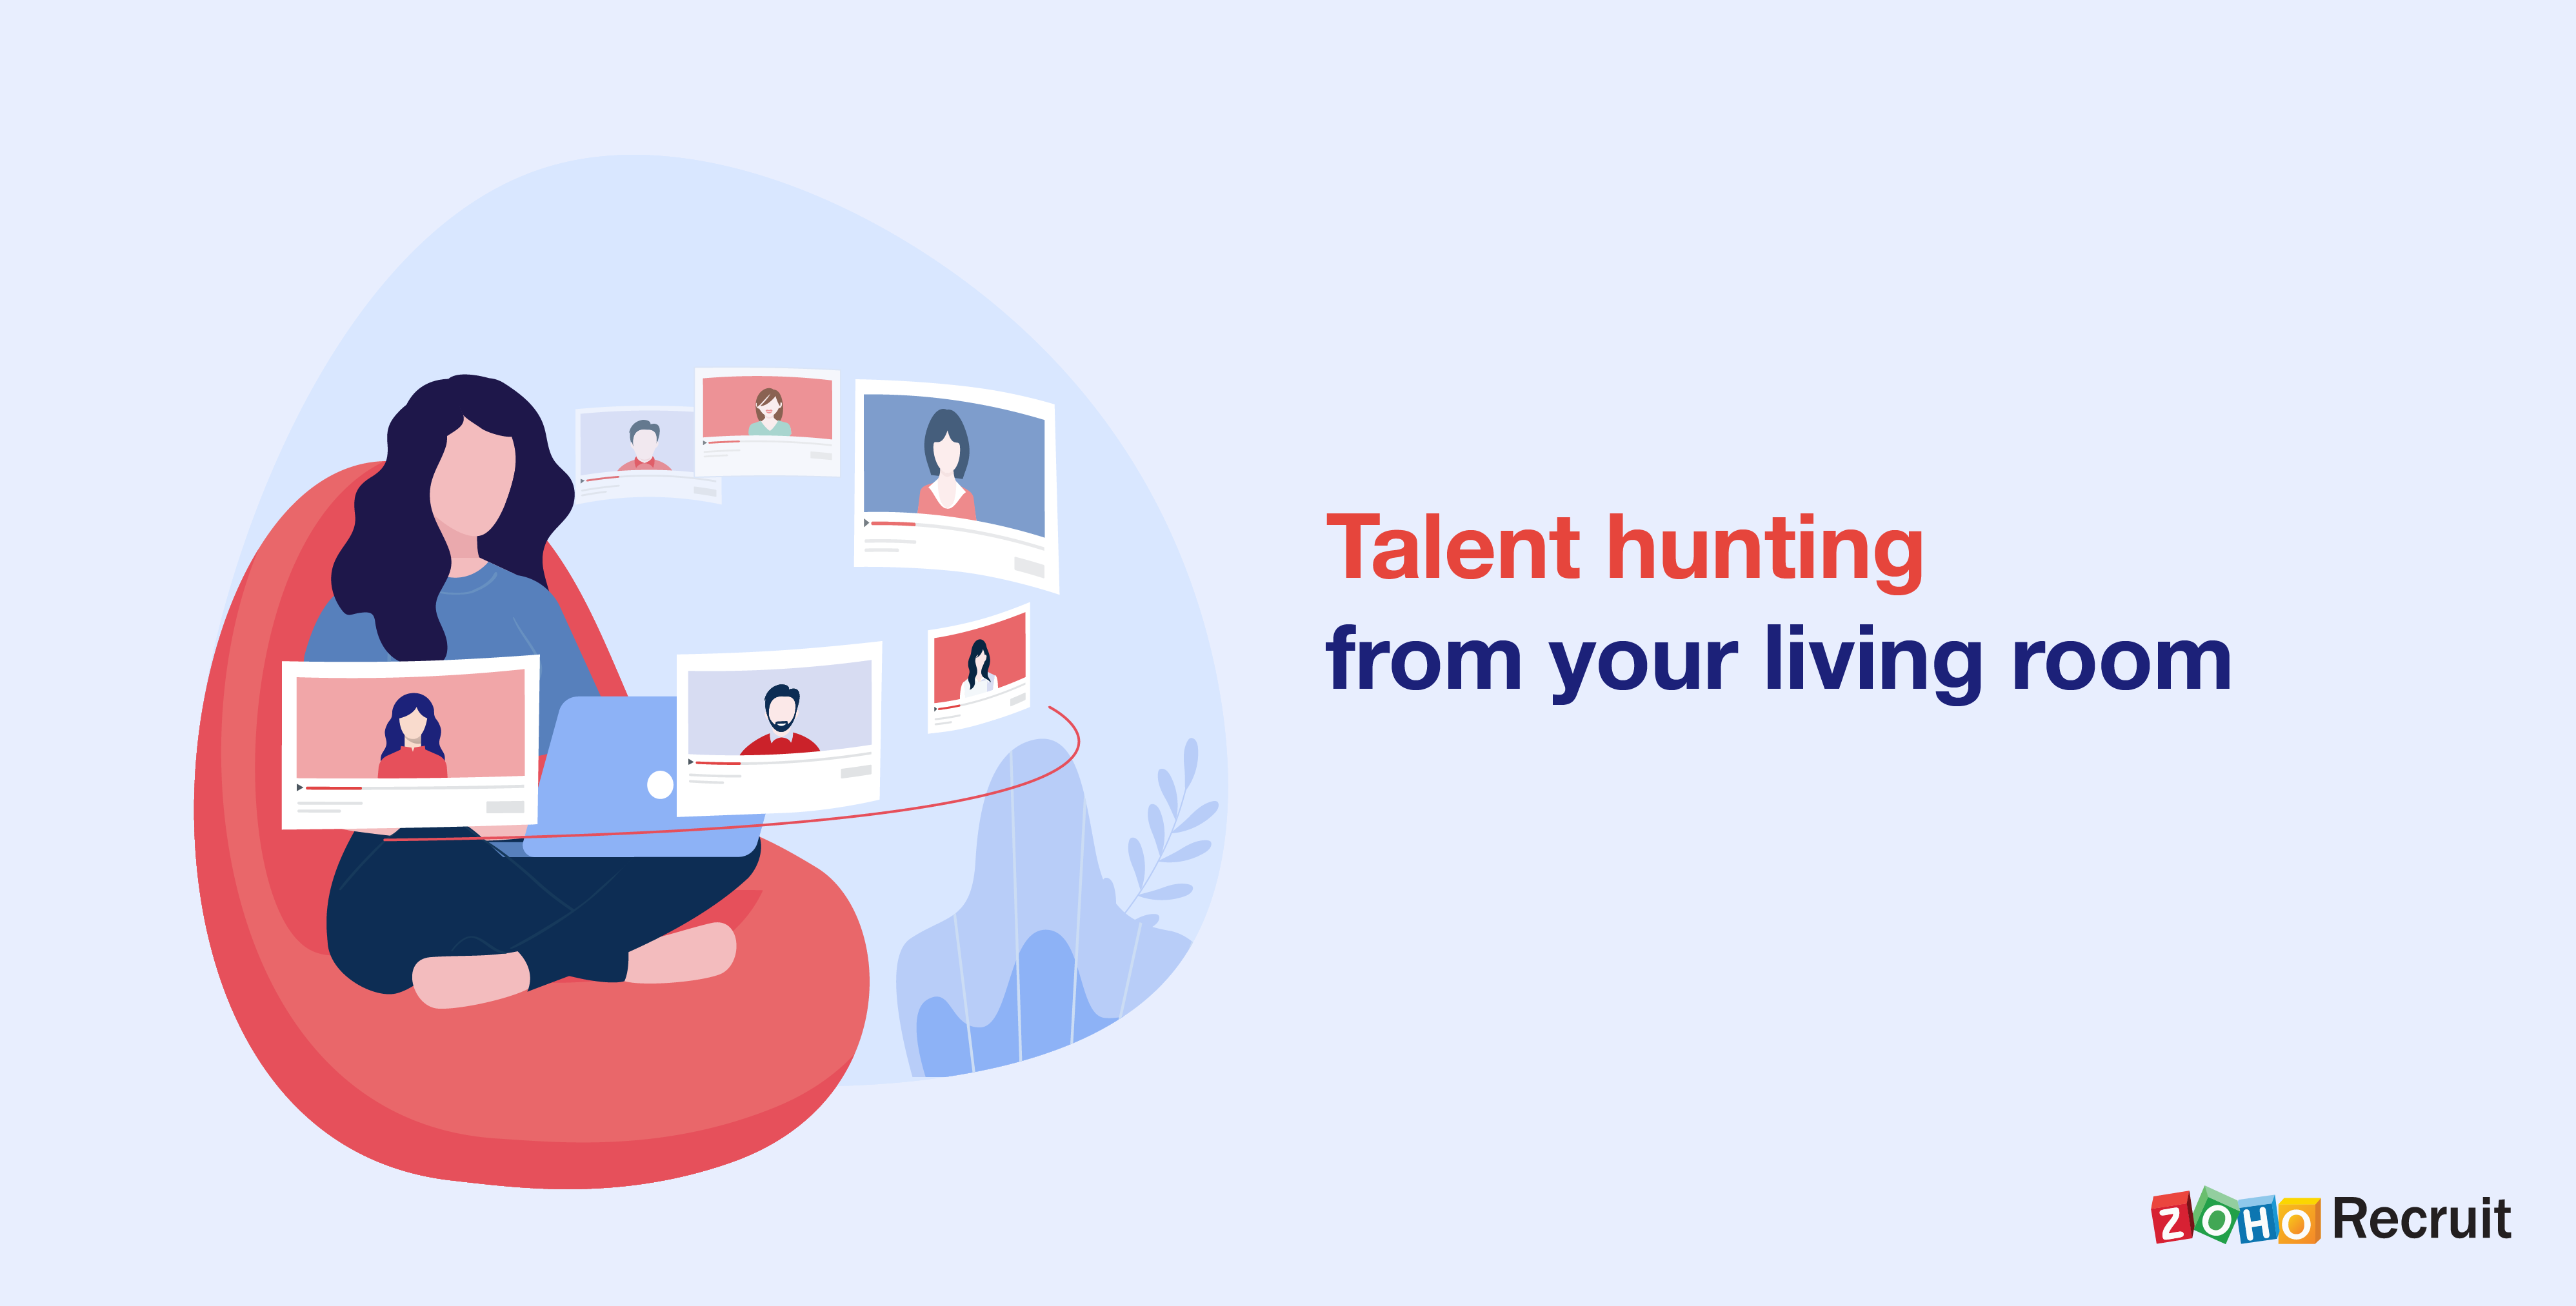 Remote hiring practices to keep your recruiting funnel moving